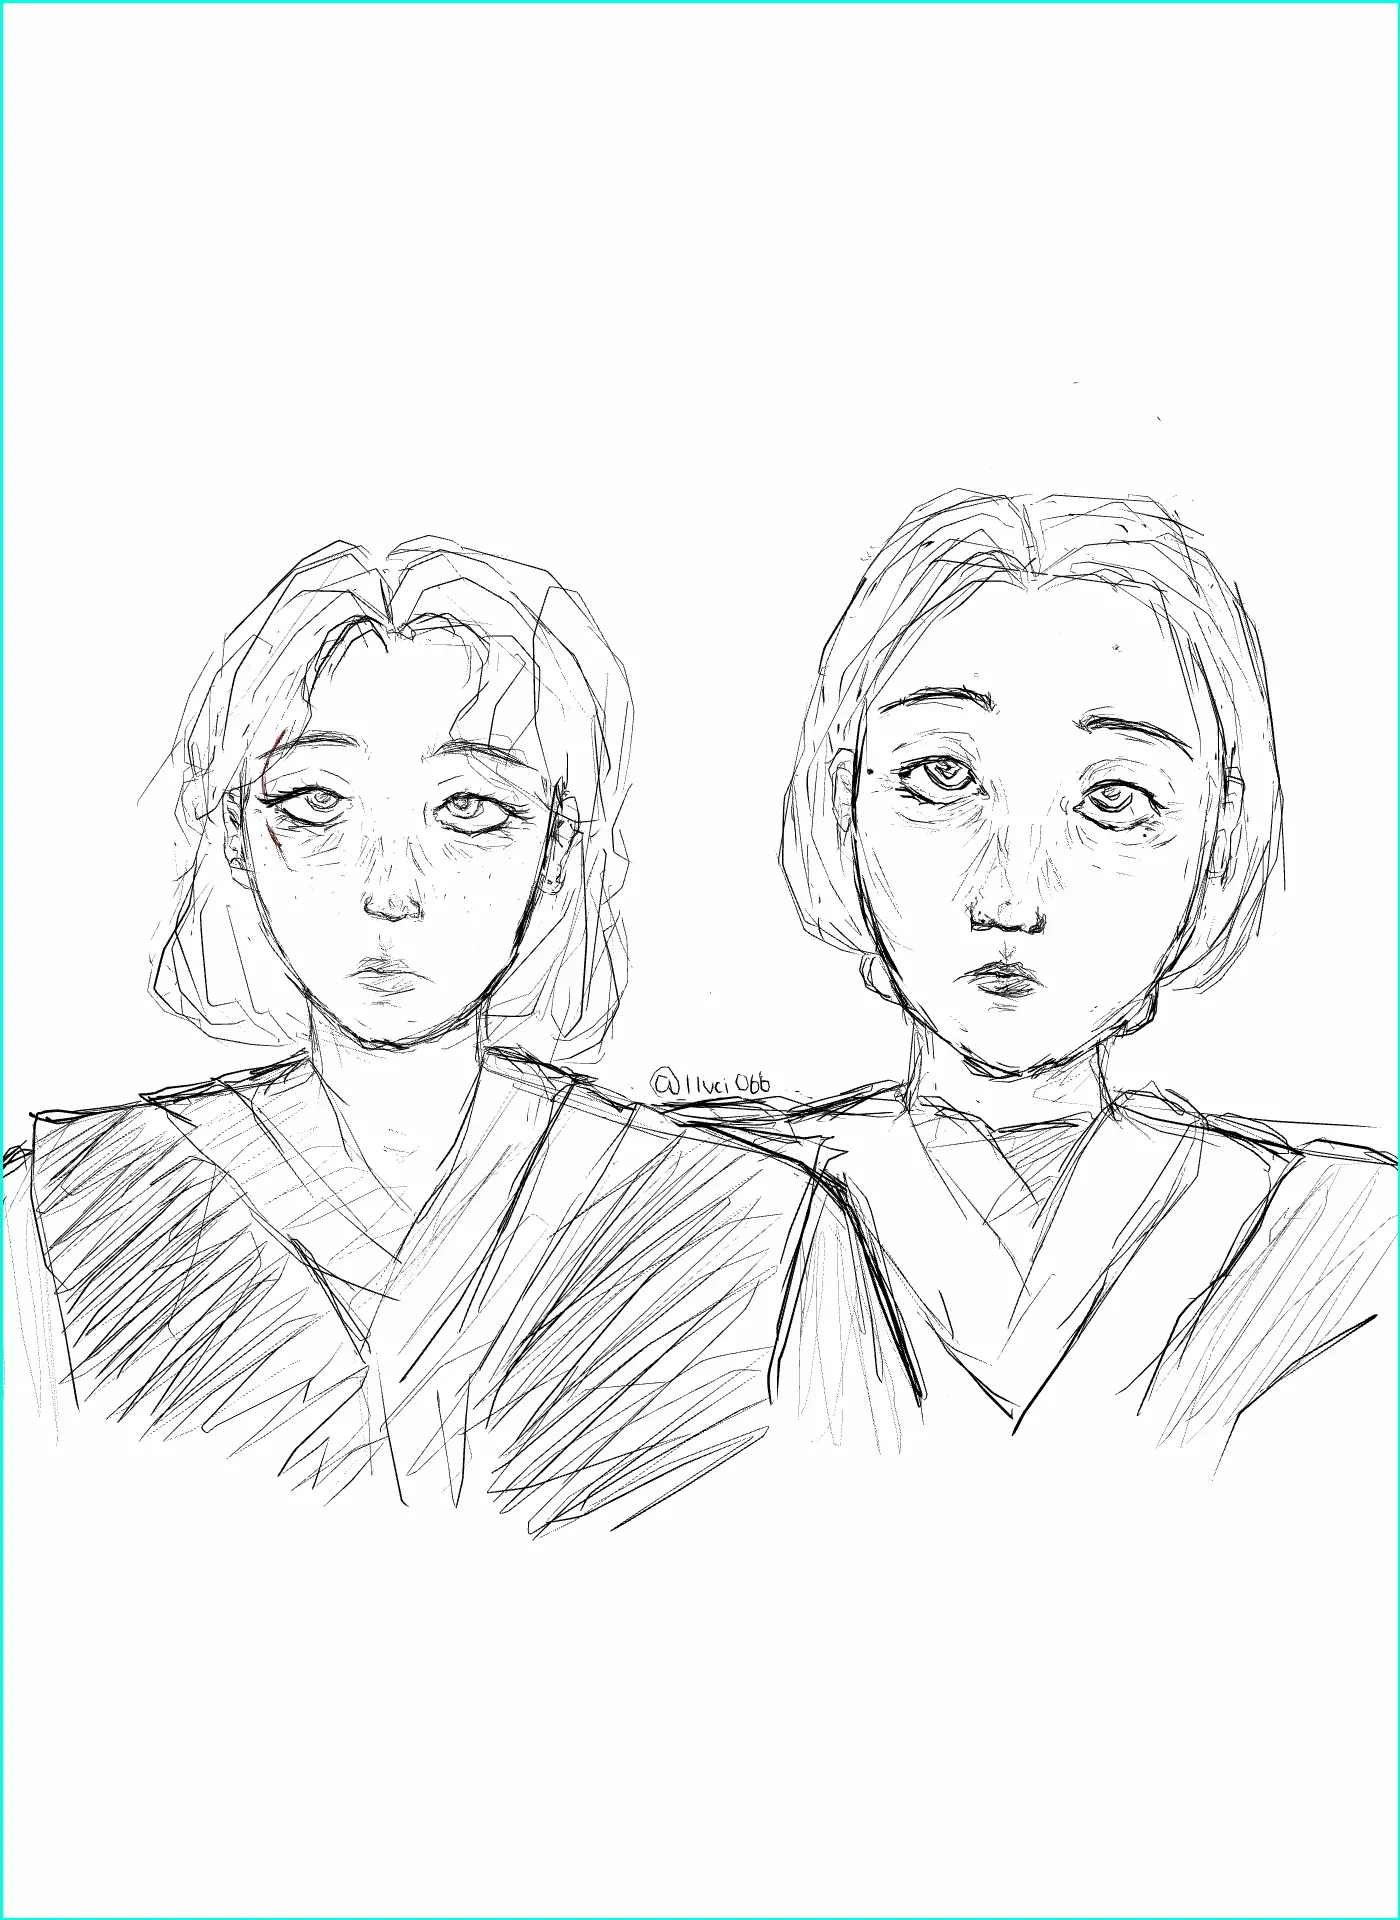 sister and me in halloween costumes! we are going to match. she’ll be anakin and i’ll be obi-wan =) for some reason i made her more unrealistic so idk how i really feel abt this drawing